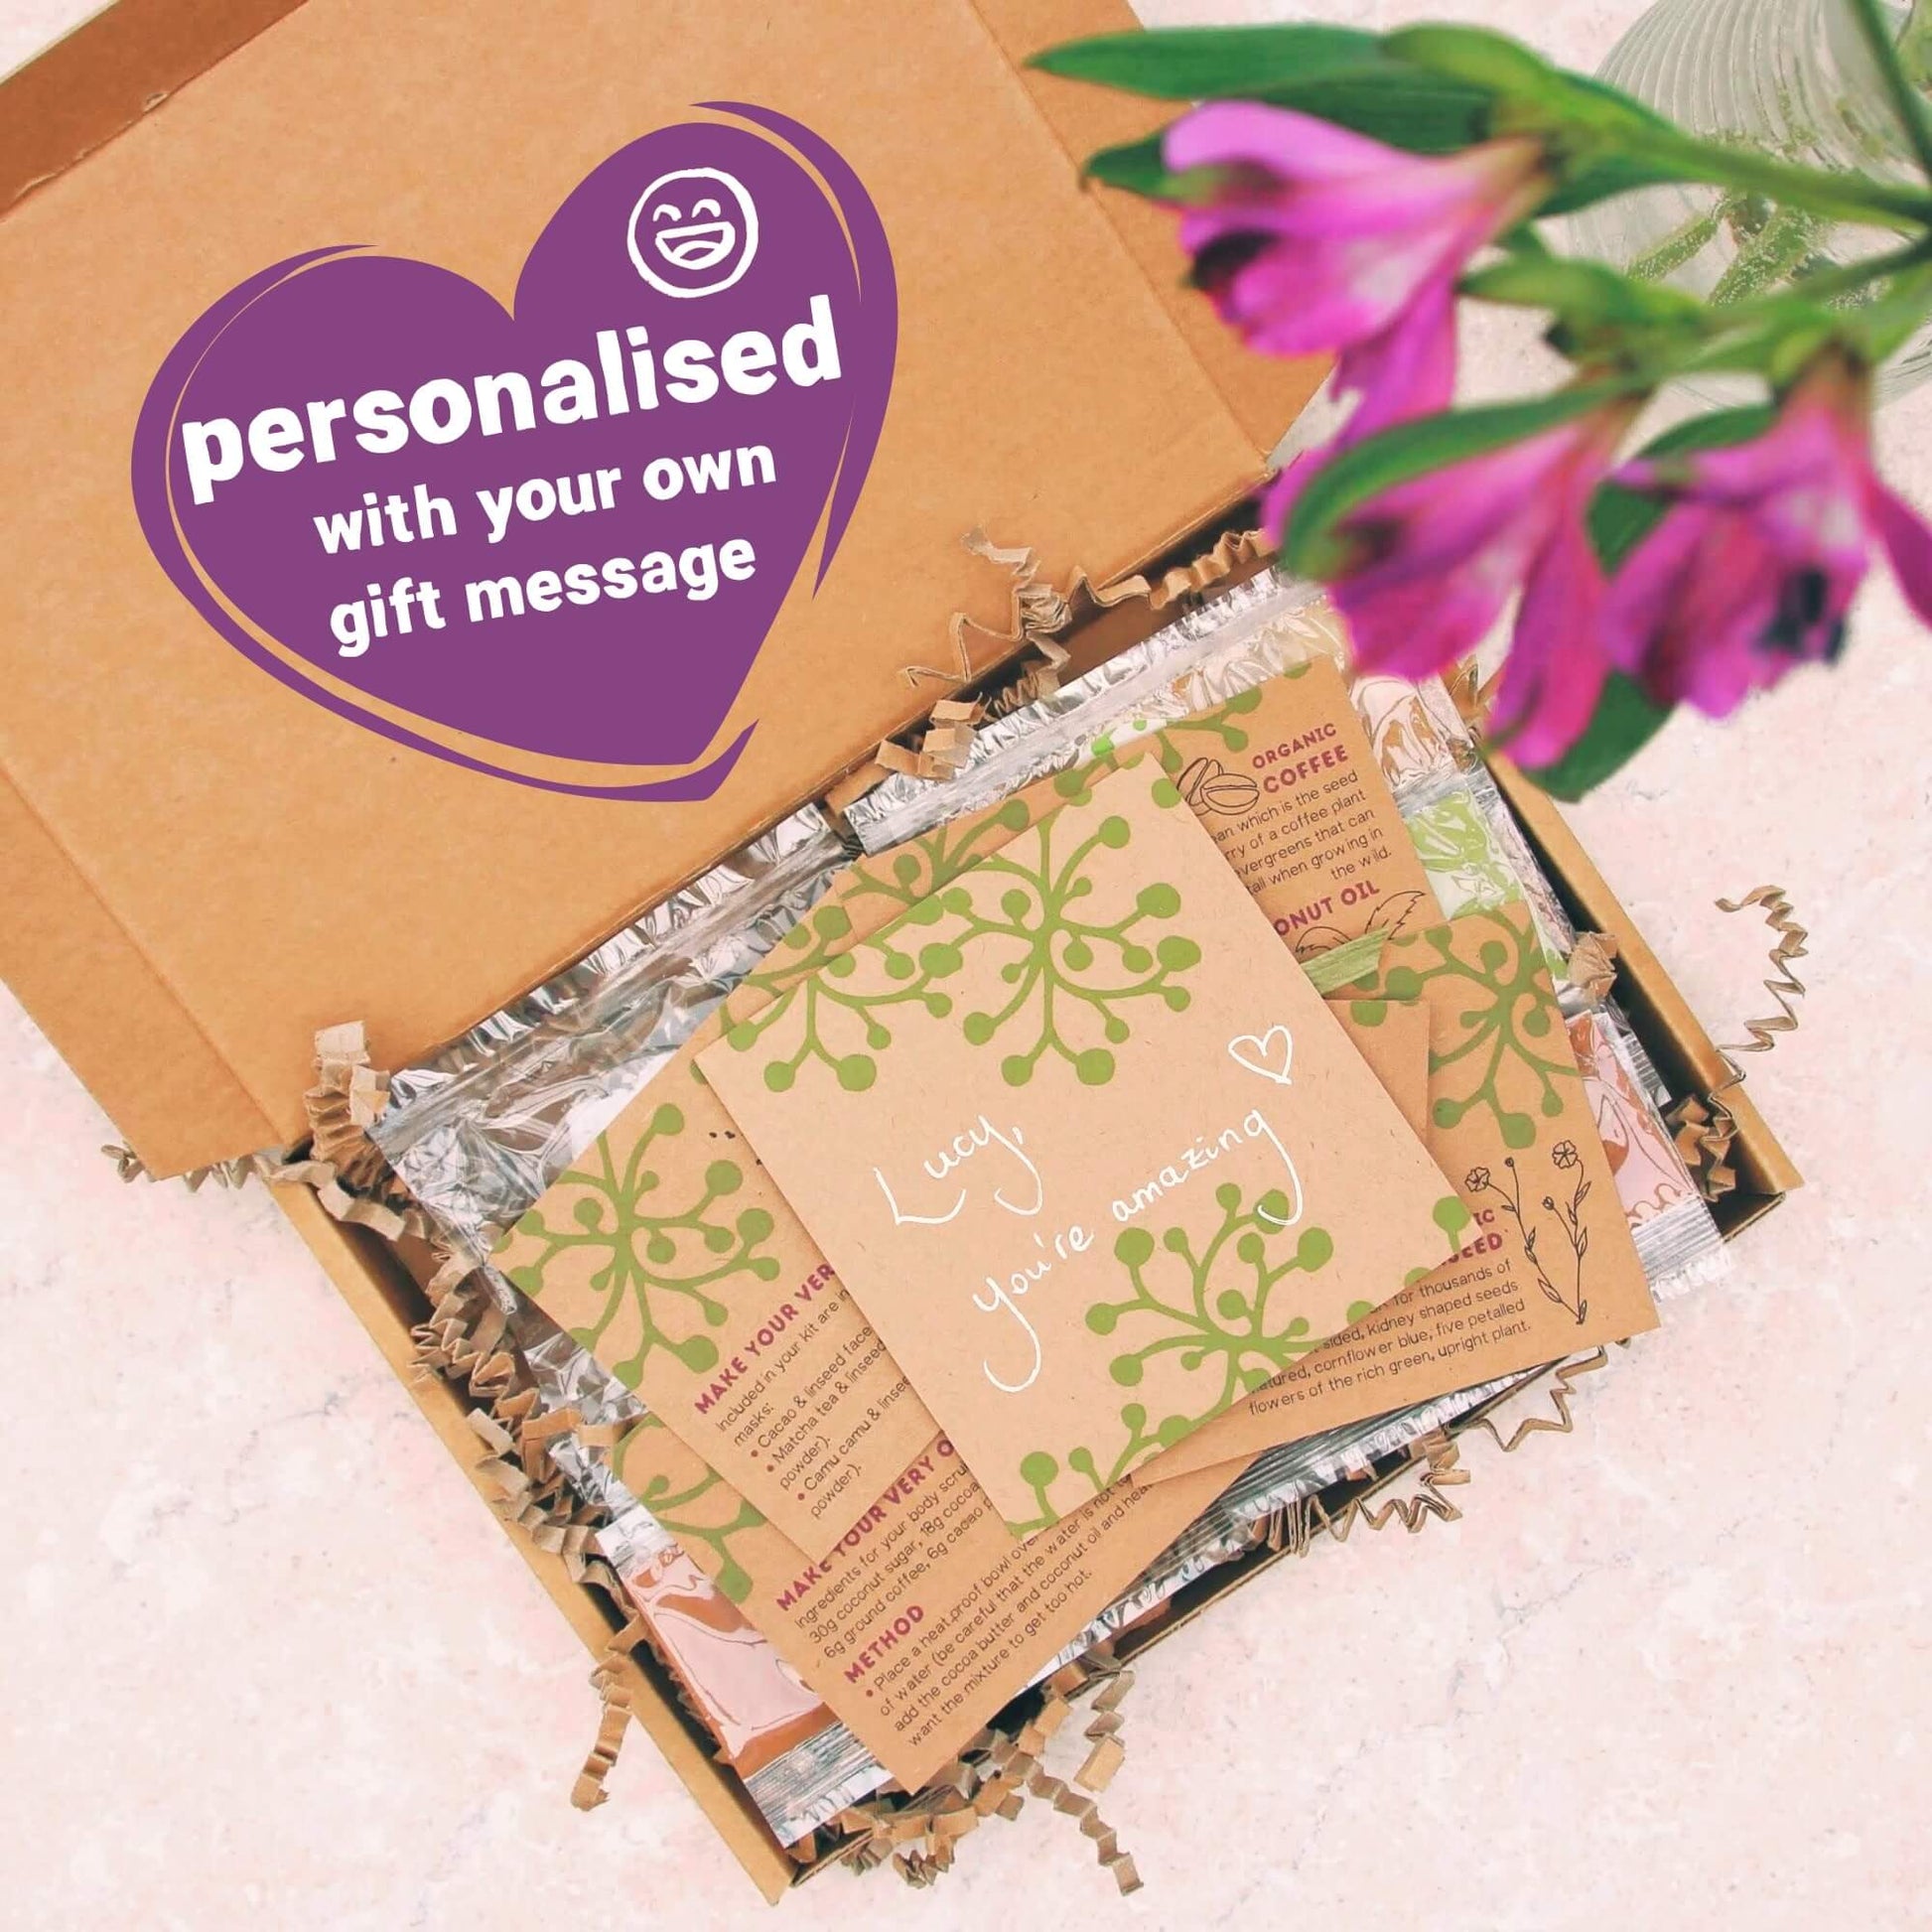 personalised gift message inside get well soon gift box